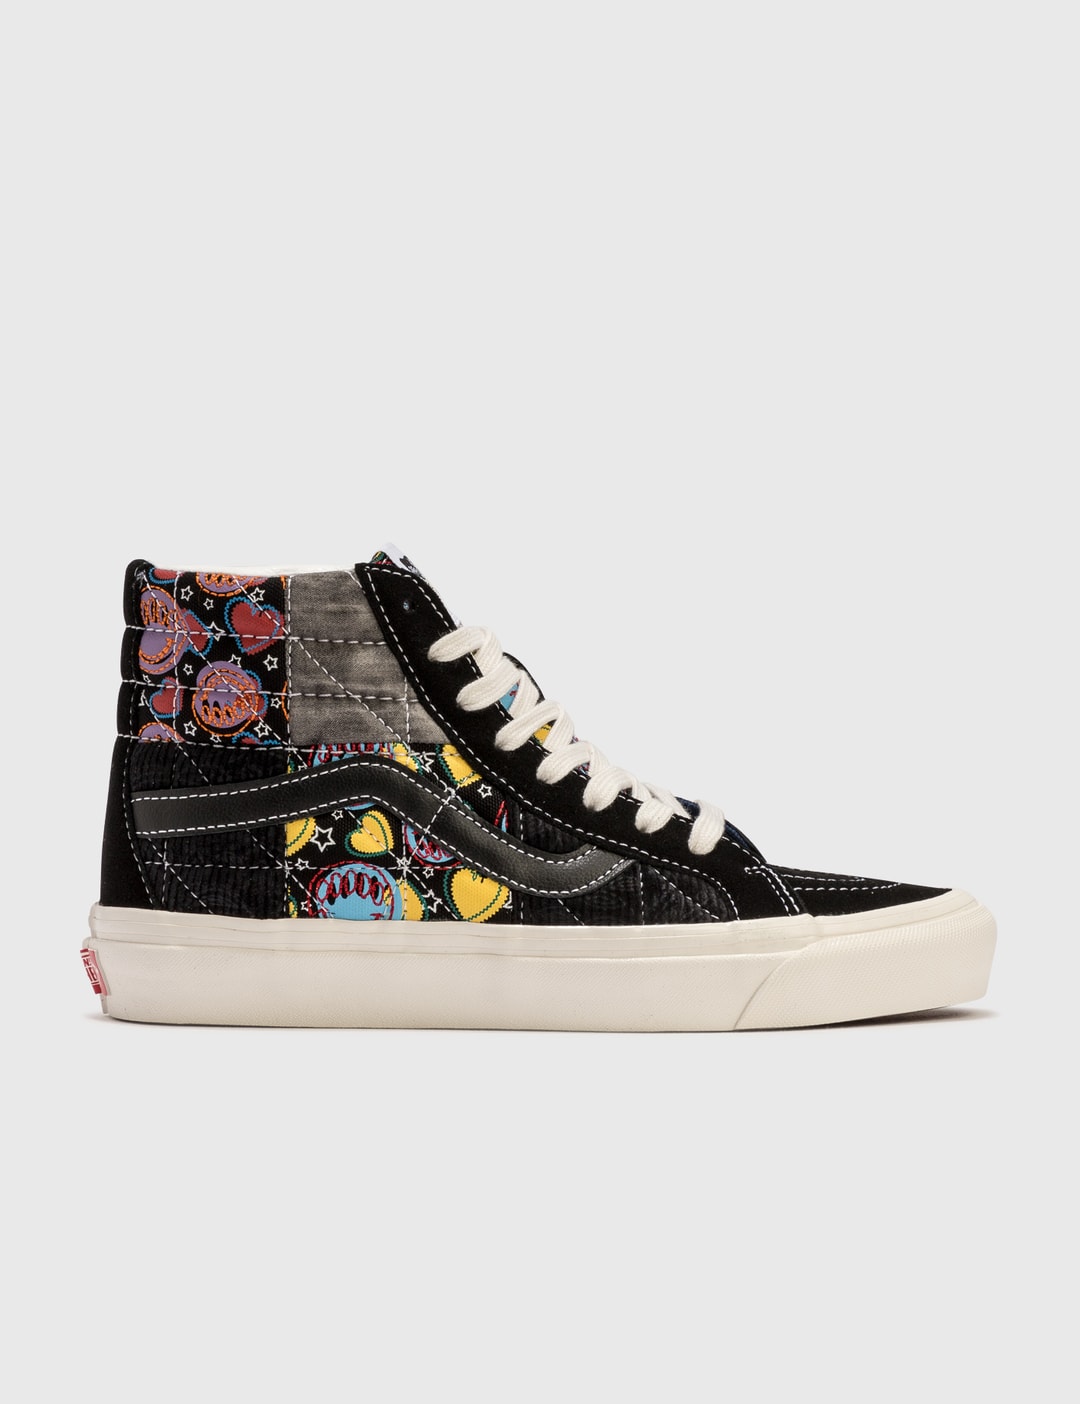 Vans - Anaheim Factory SK8-HI 38 DX | HBX - Globally Curated Fashion ...